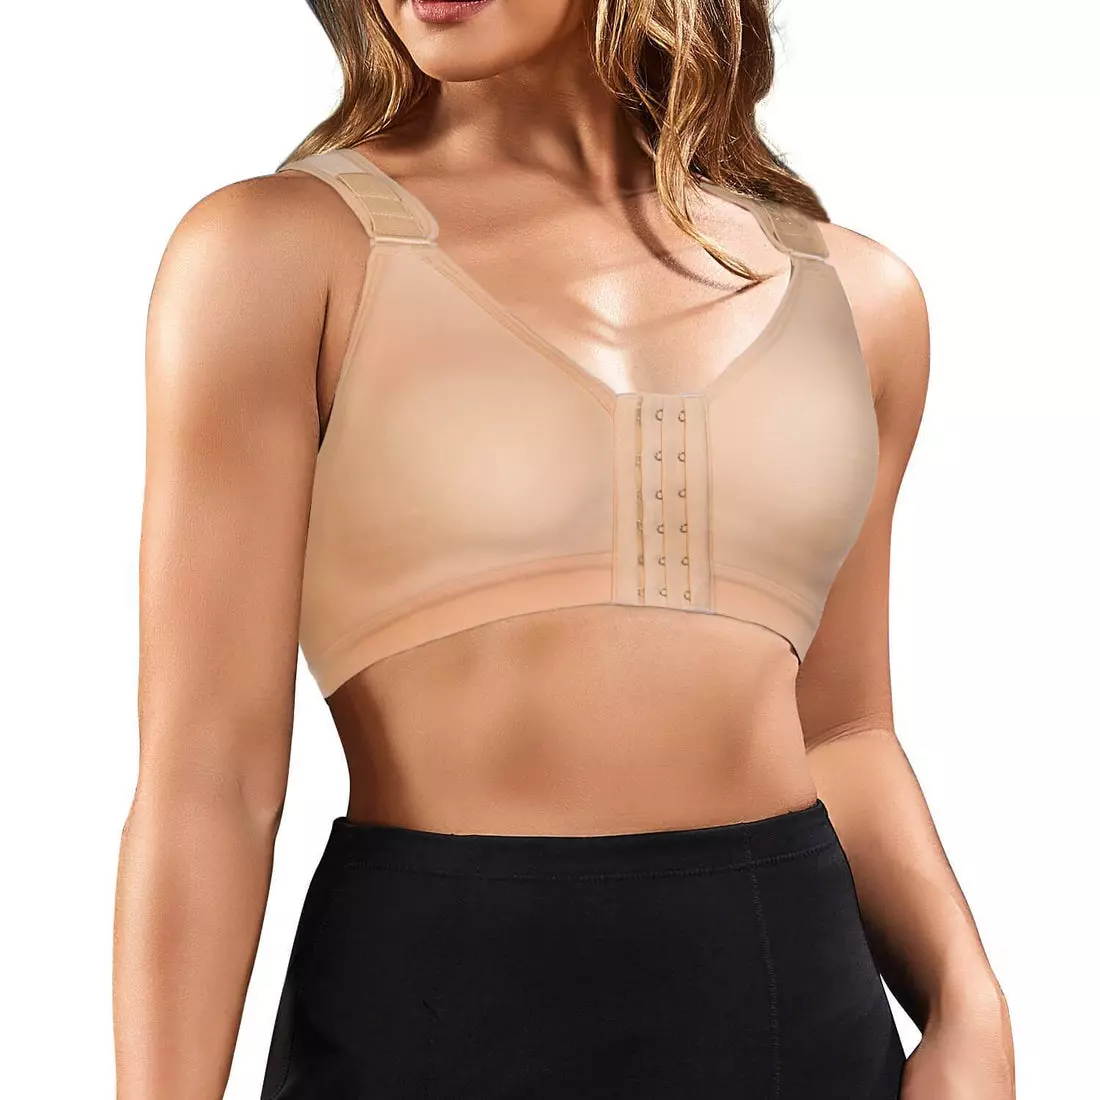 Brabic Women Post-Surgical Sports Support Bra